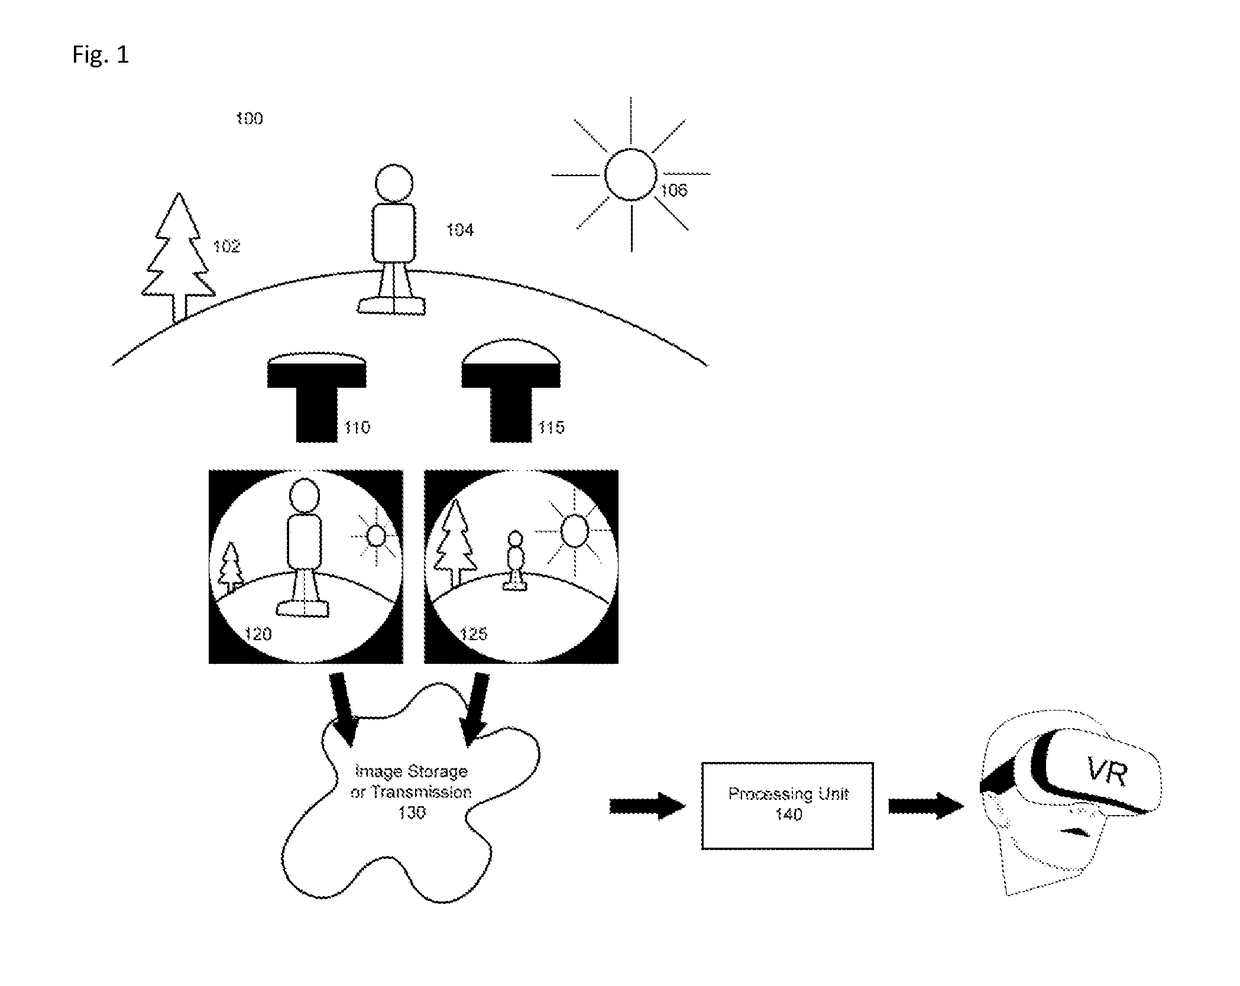 Wide-angle stereoscopic vision with cameras having different parameters